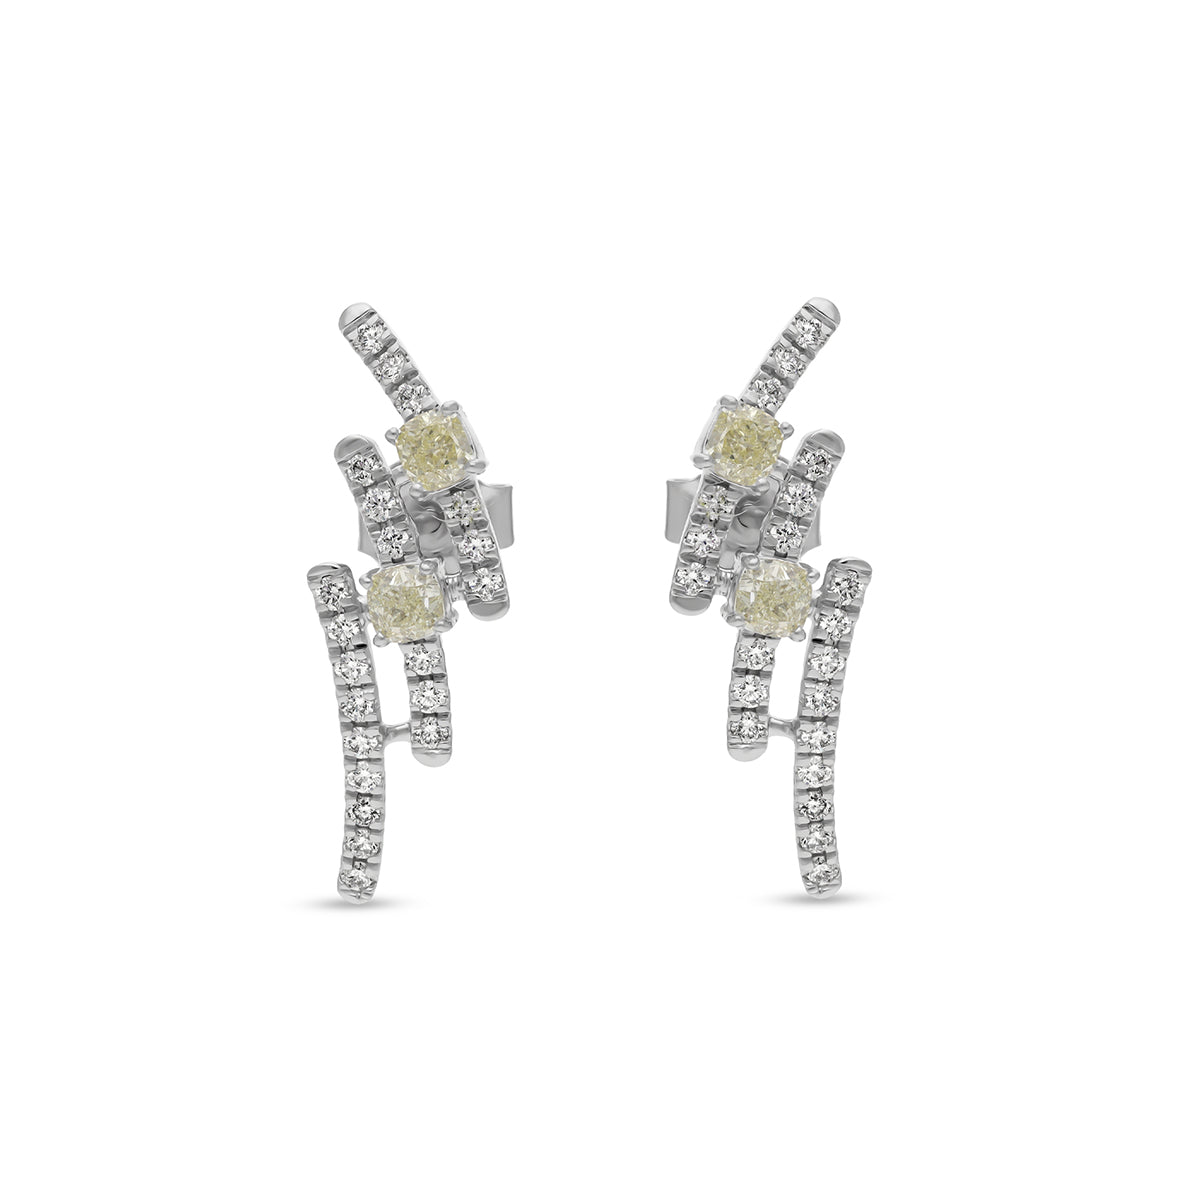 Emerald Cut and Round Diamond White Gold Stud Earrings